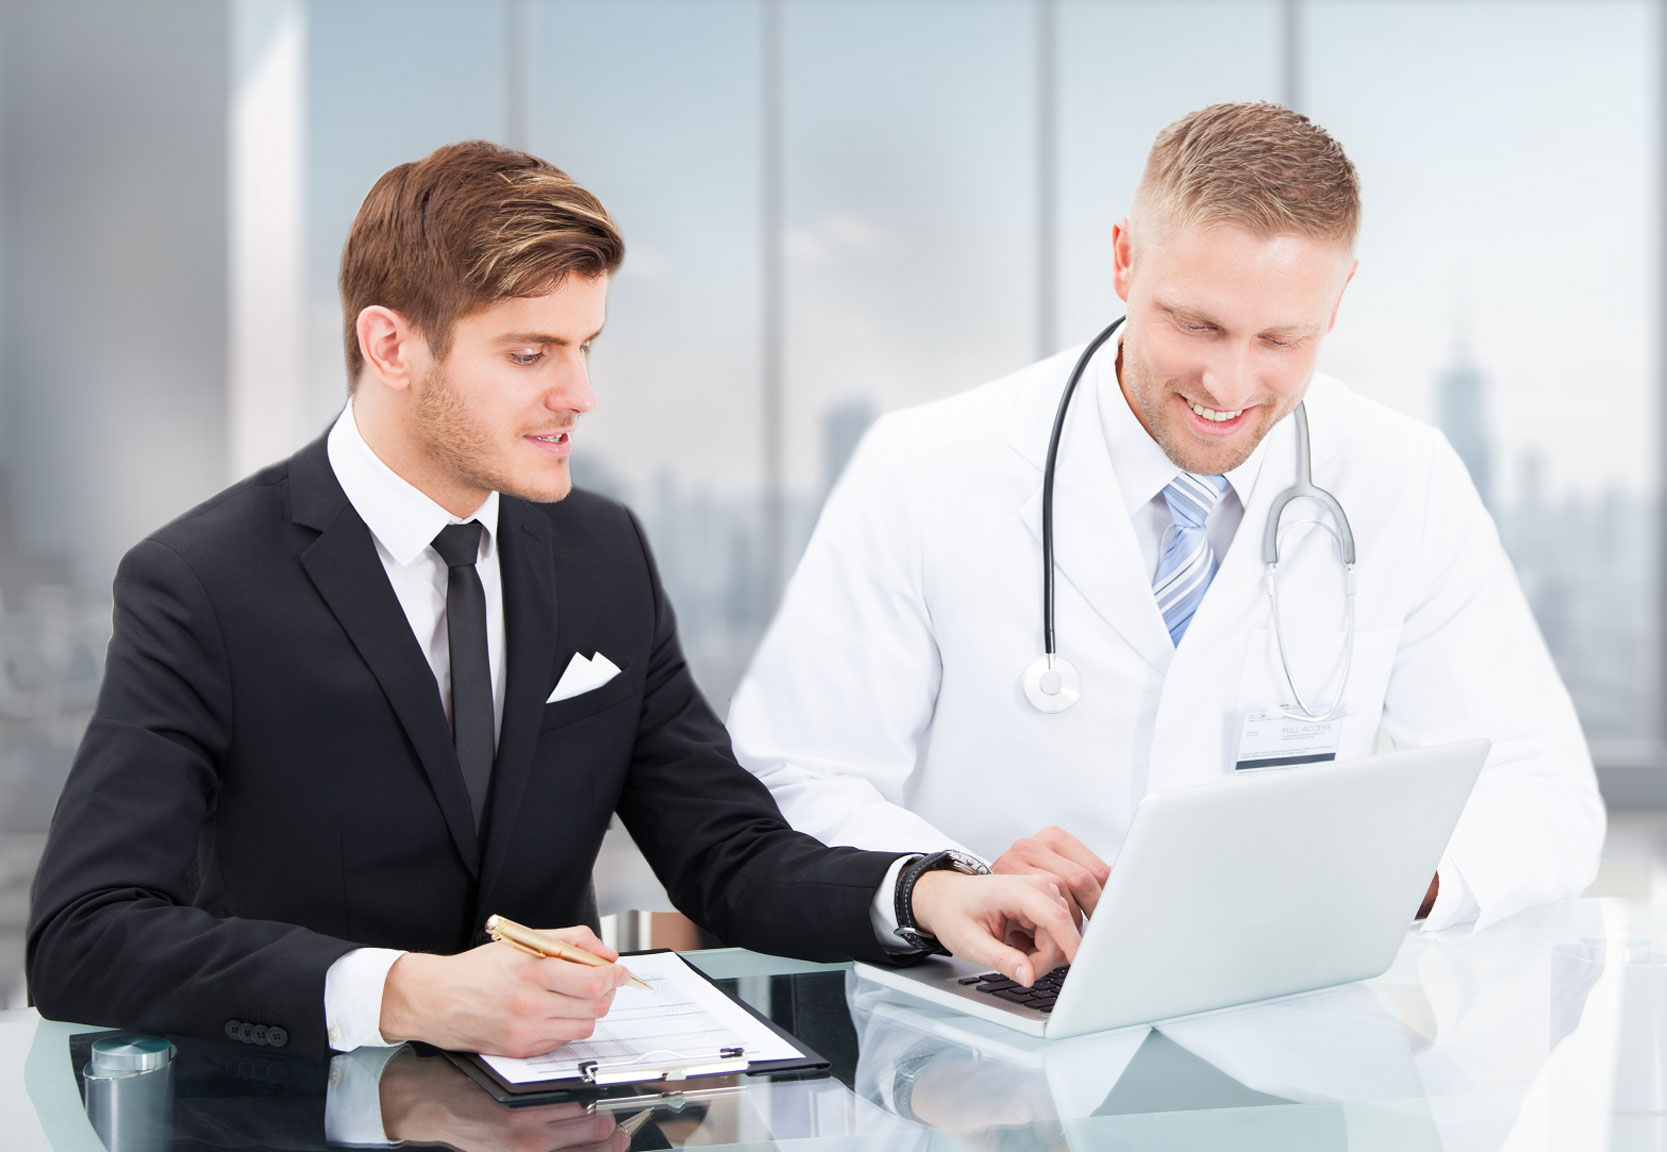 Overcoming Challenges in Medical Credentialing for Small and Solo Practices